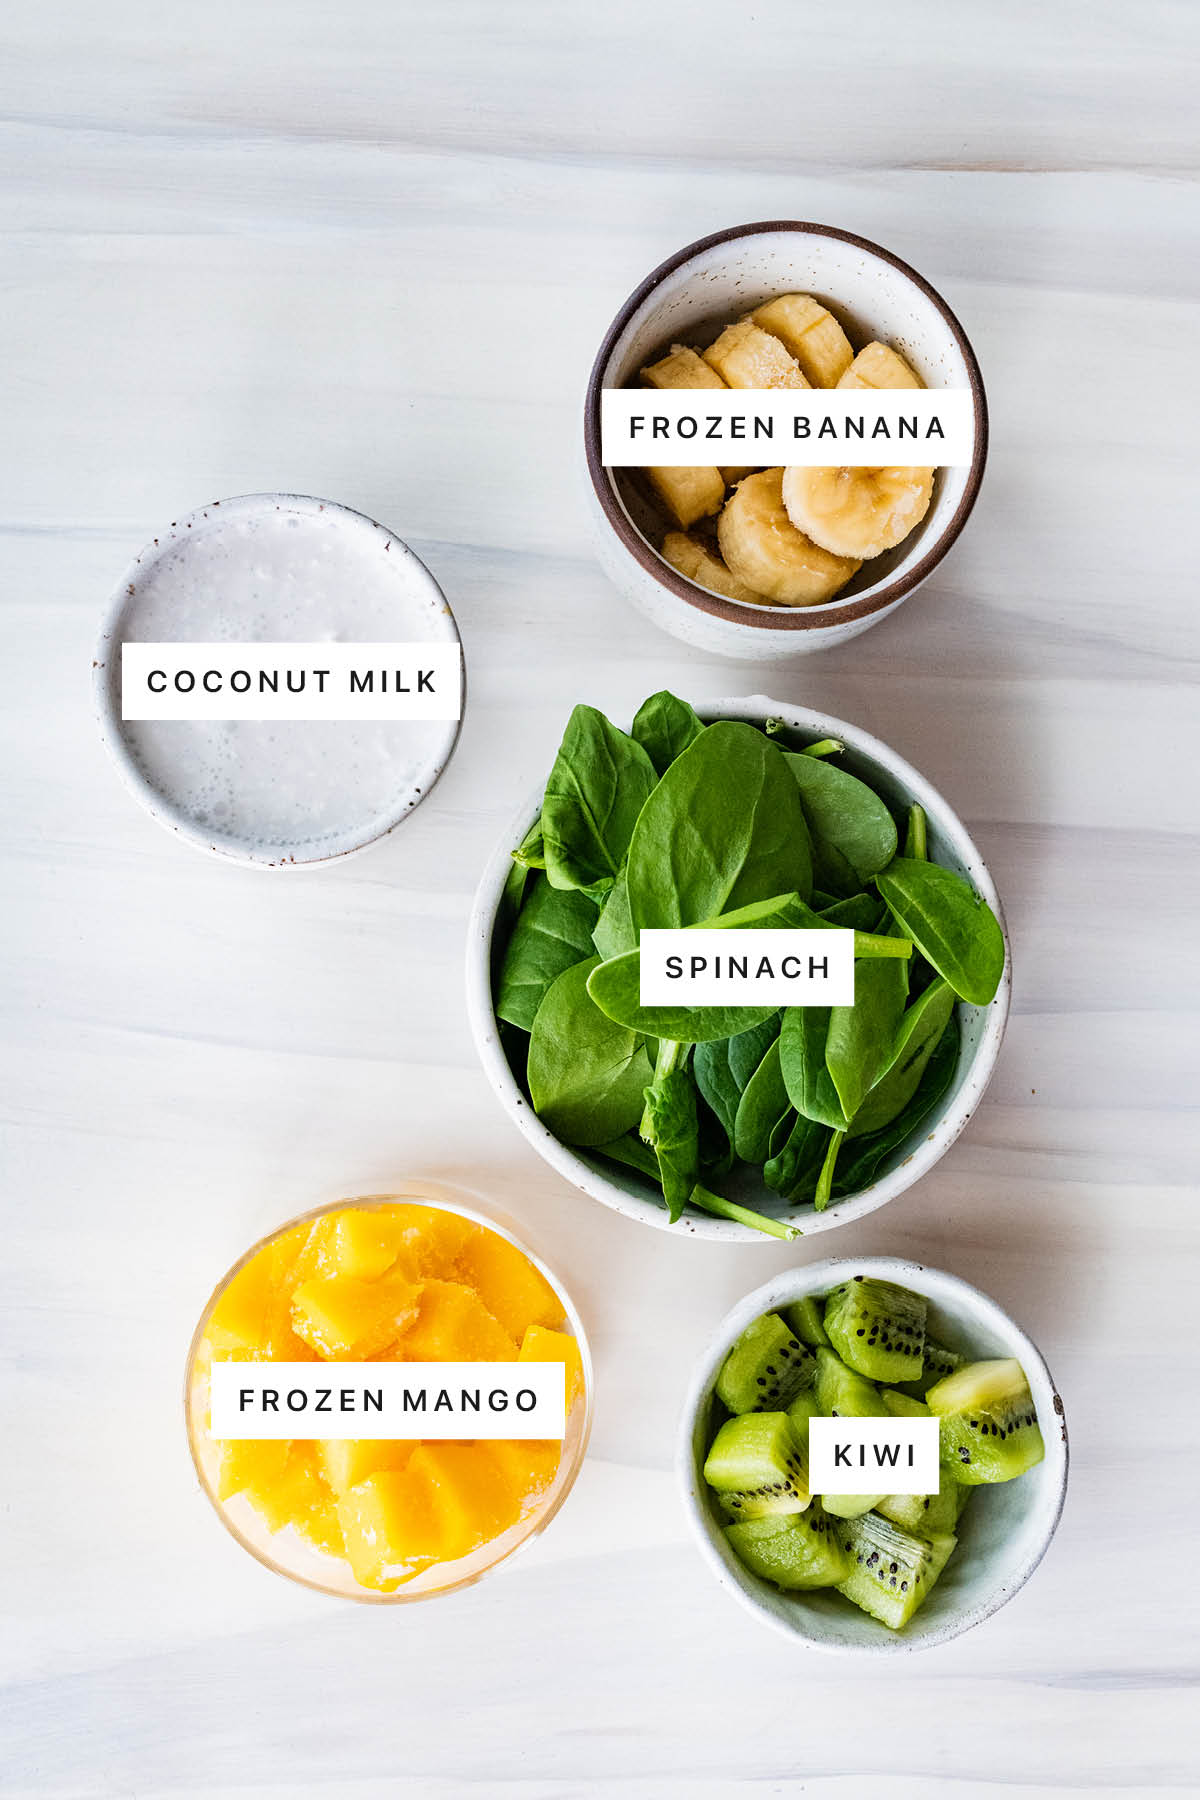 Ingredients measured out to make a Kiwi Smoothie: frozen banana, coconut milk, spinach, frozen mango and kiwi.